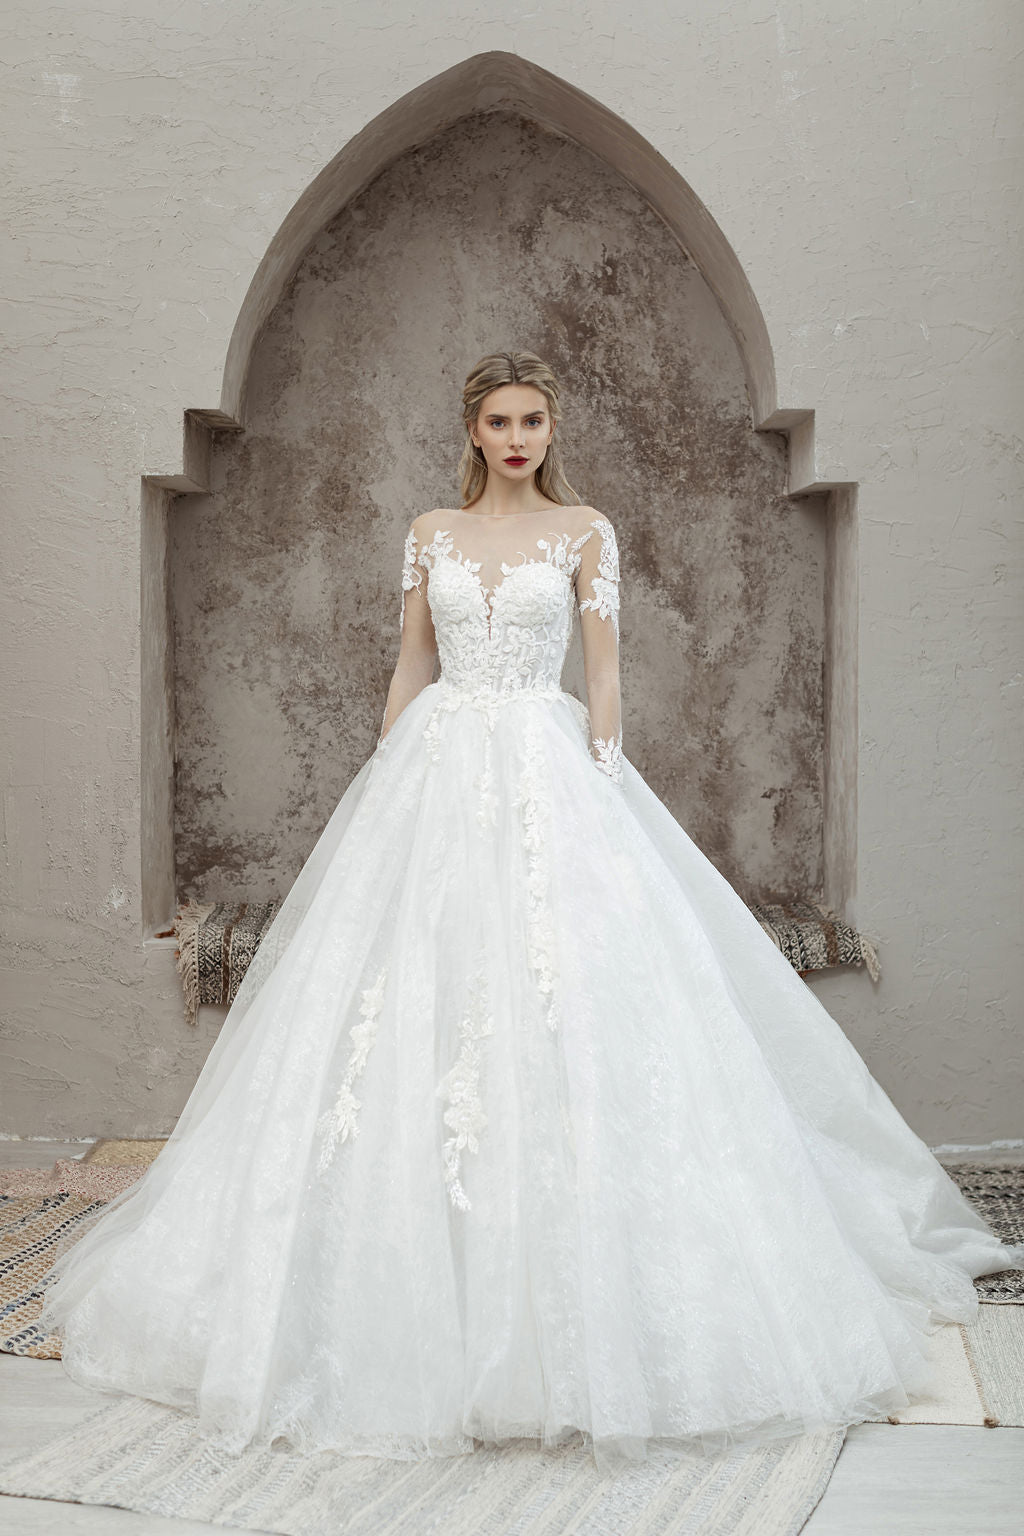 Princess Ball Gown Lace Wedding Dresses 2020 Corset Sweetheart